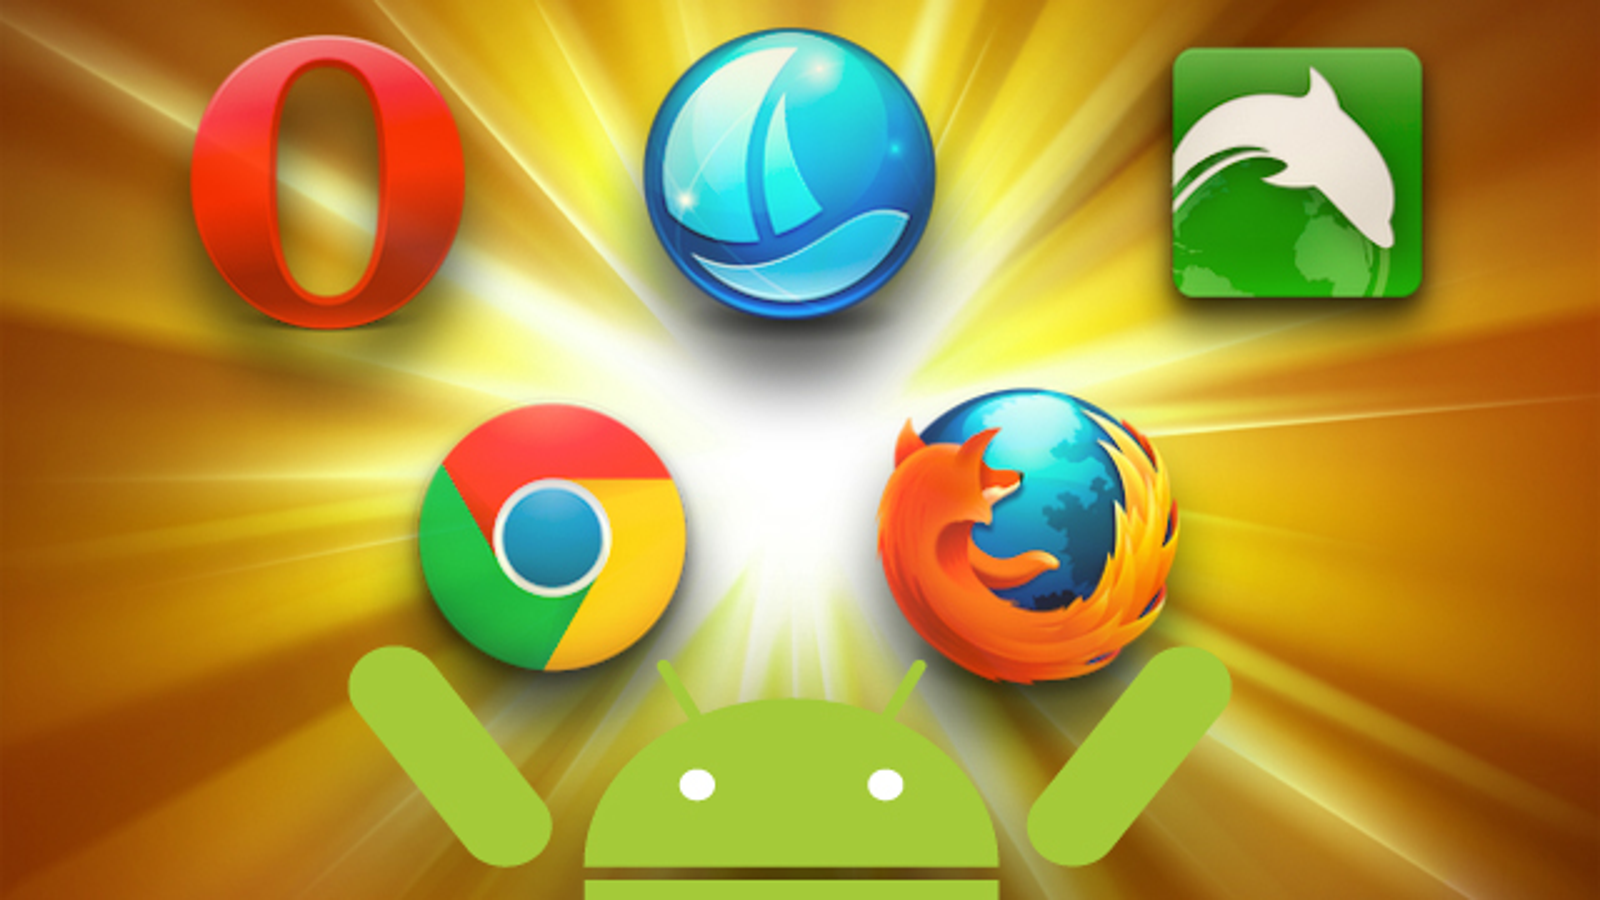 bonjour browser android